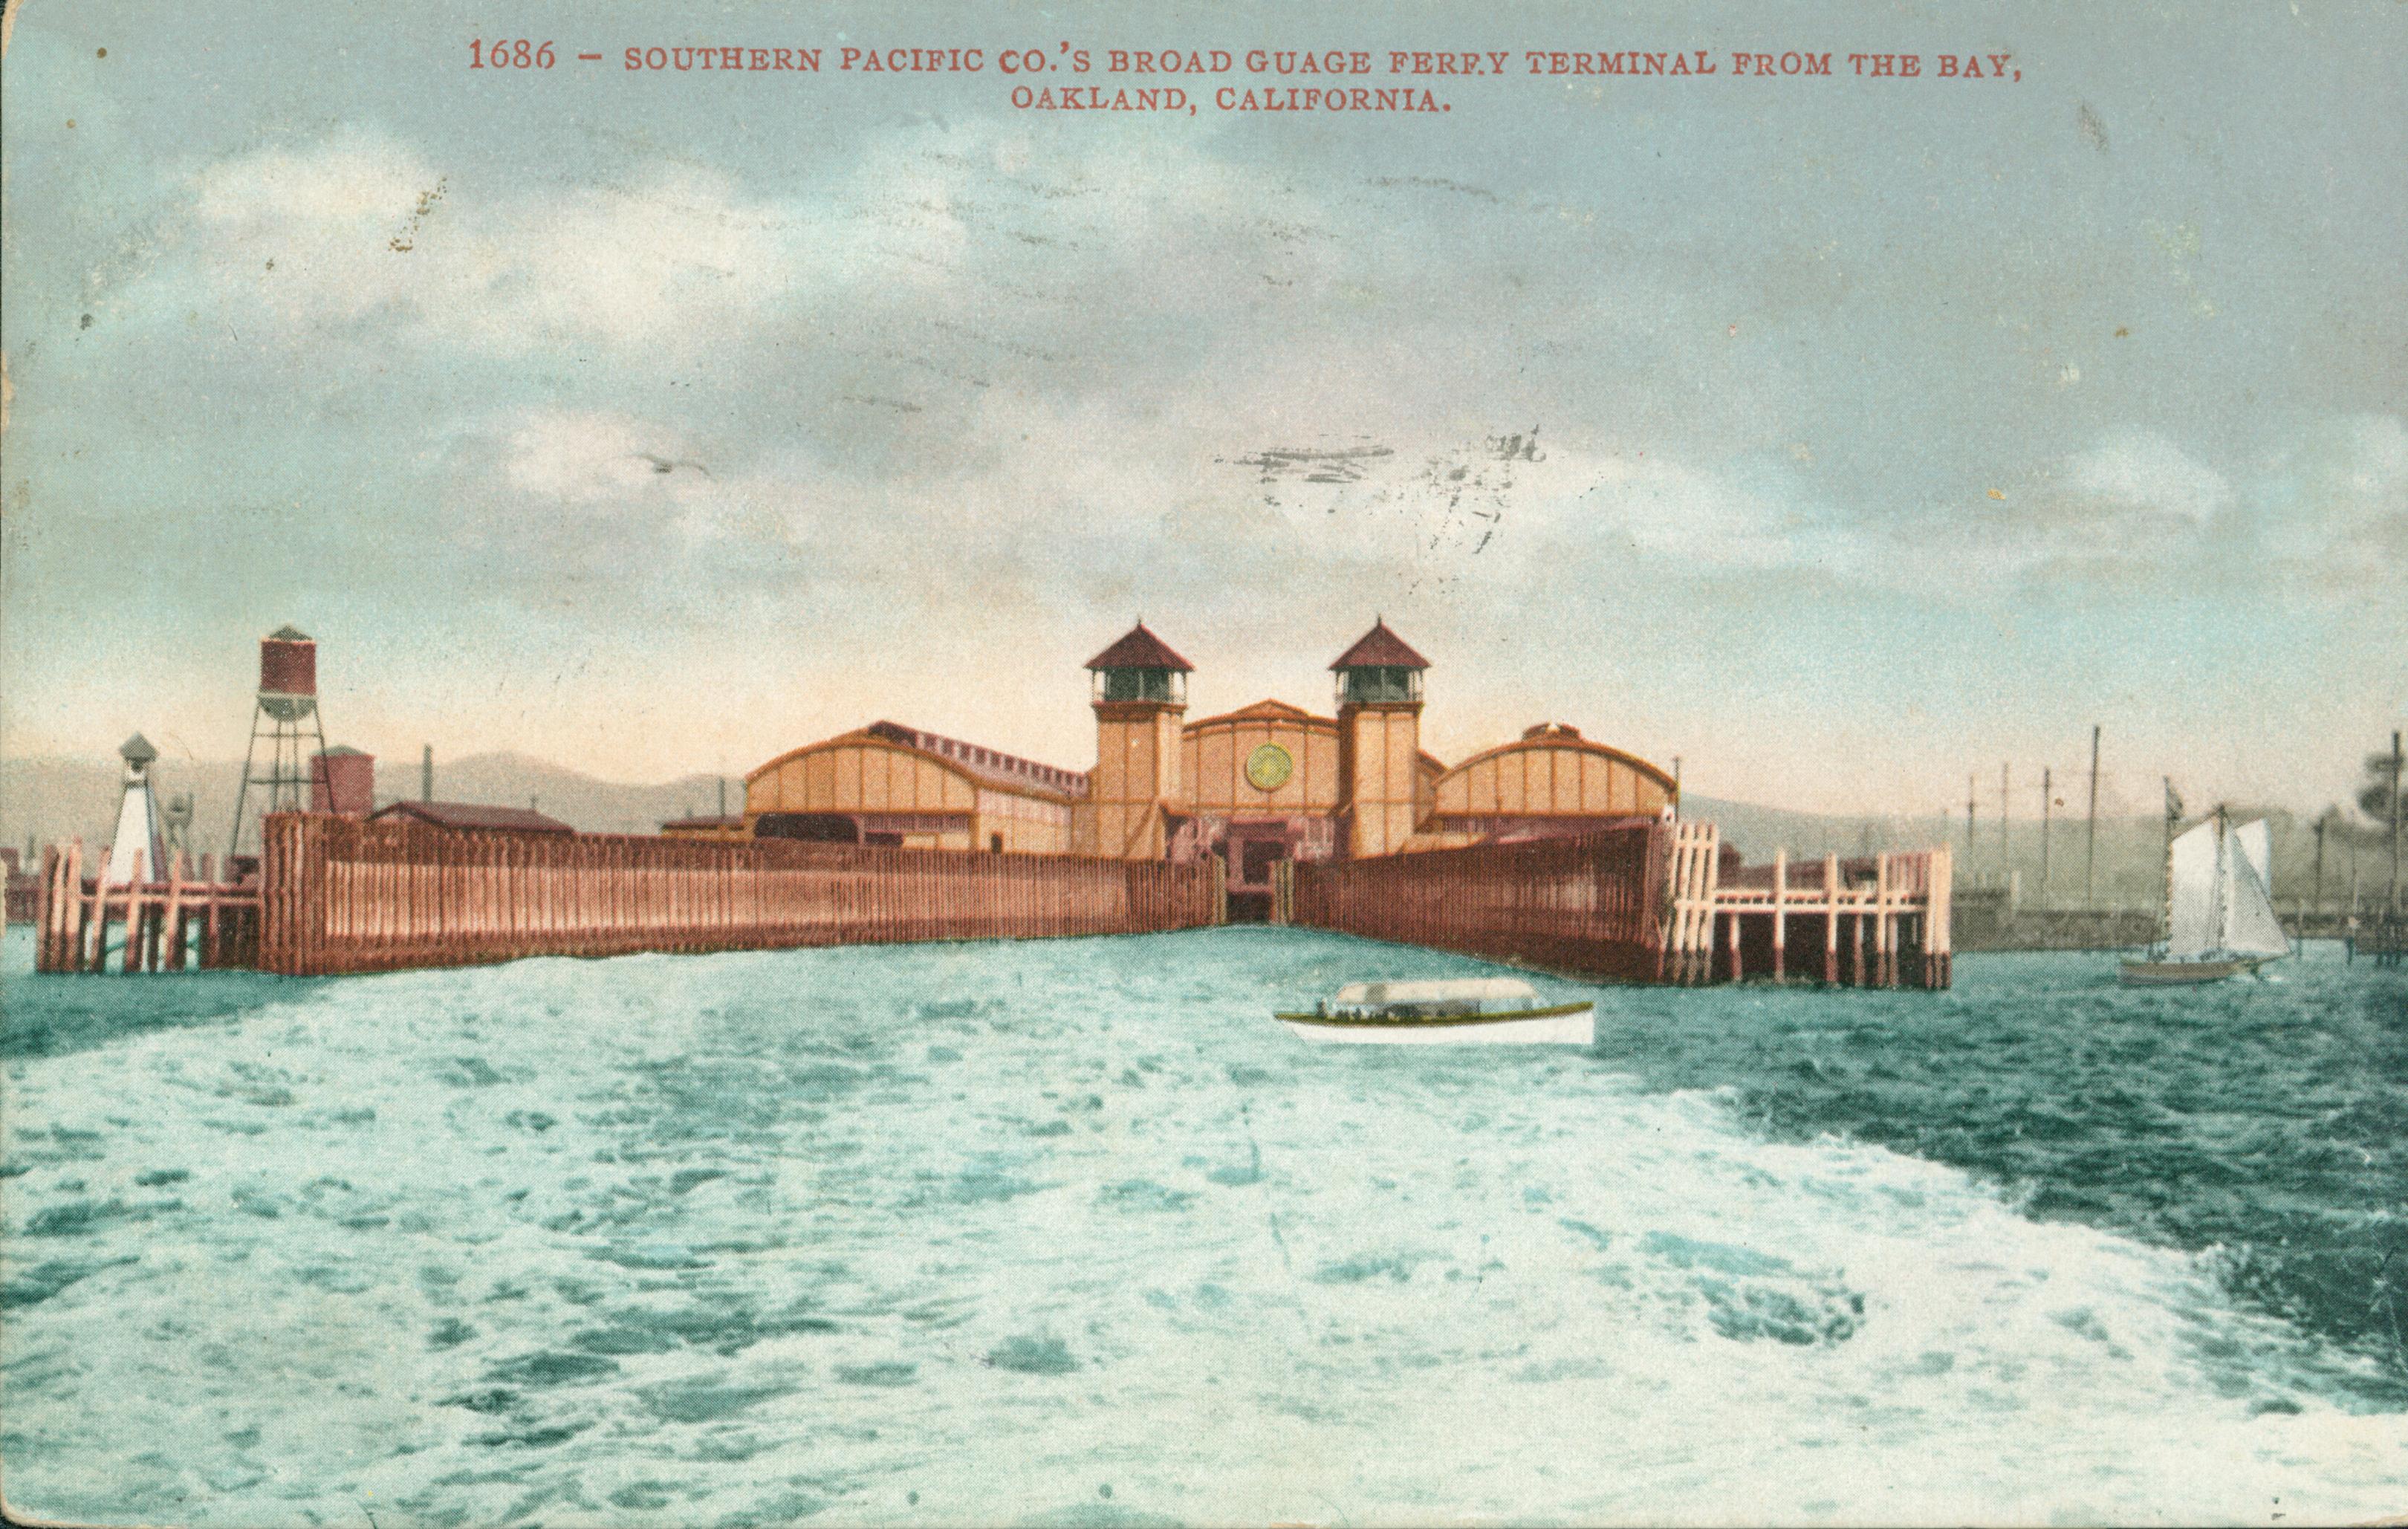 Shows the water view of the ferry terminal for the Southern Pacific train ferries